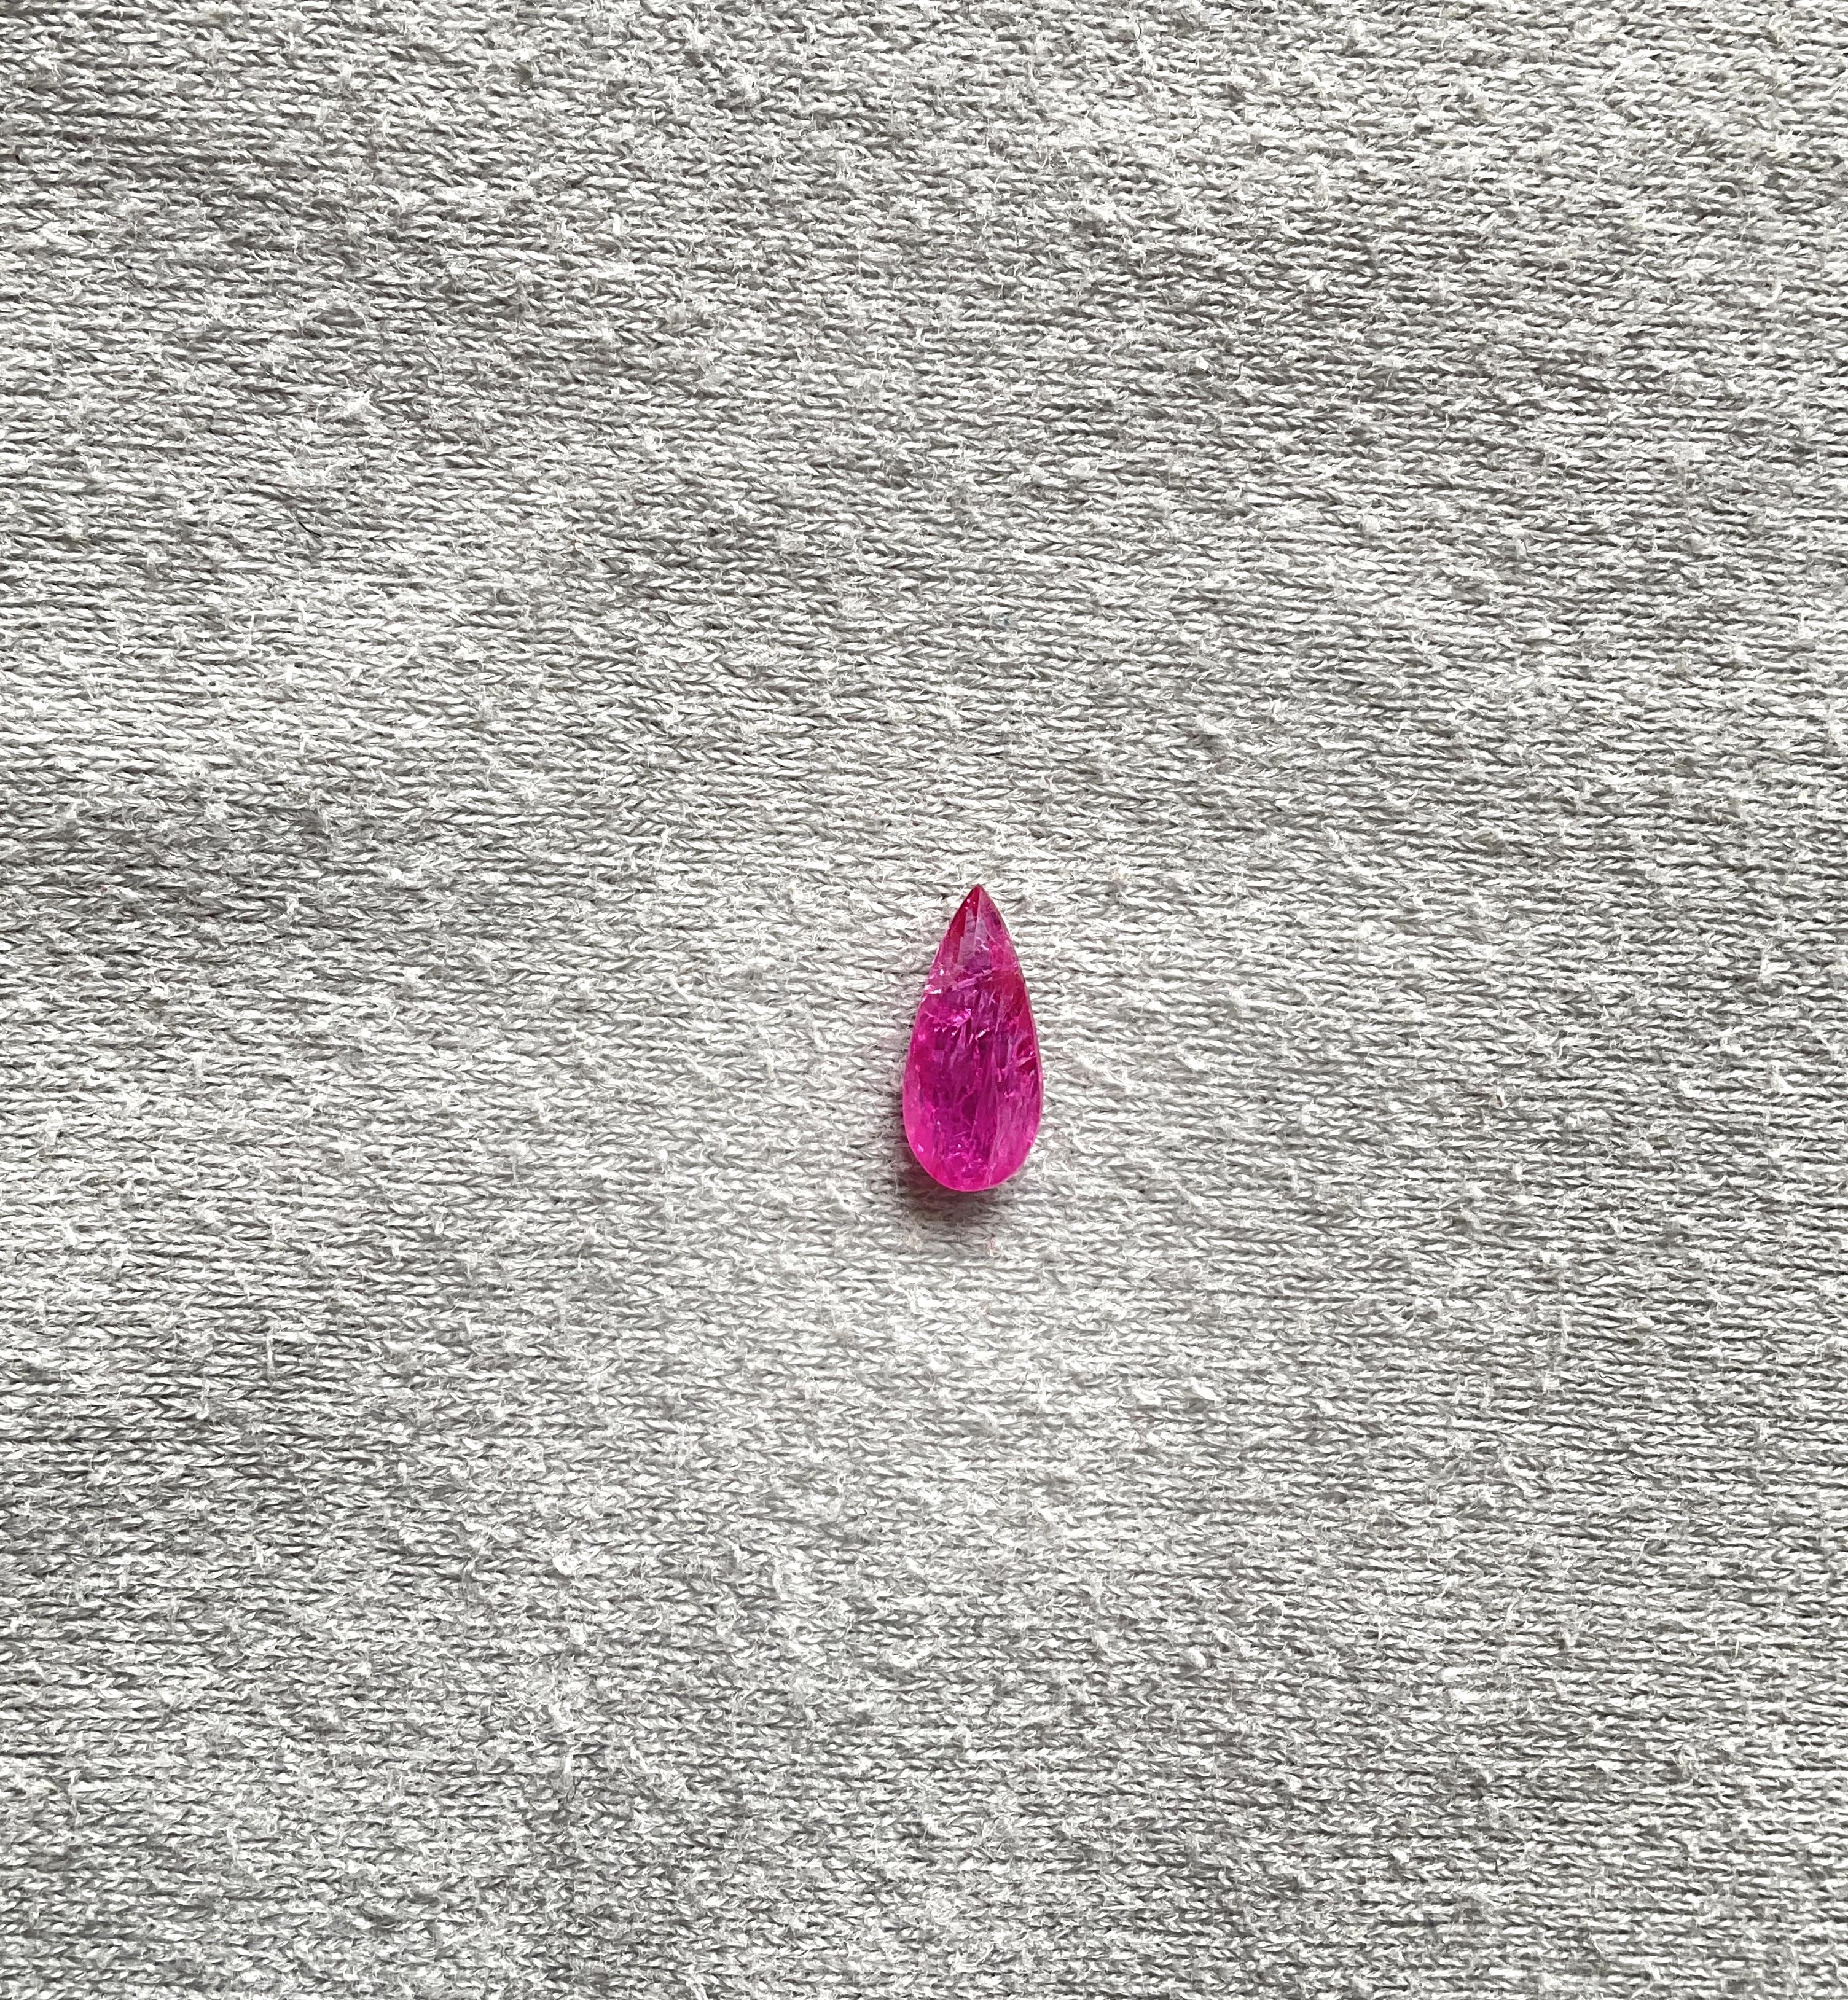 As we are auction partners at Gemfields, we have sourced these rubies from winning auctions and had cut them in our in house manufacturing responsibly.

Weight: 1.48 Carats
Size: 10.5x5x3 MM
Pieces: 1
Shape: Faceted pear cut stone